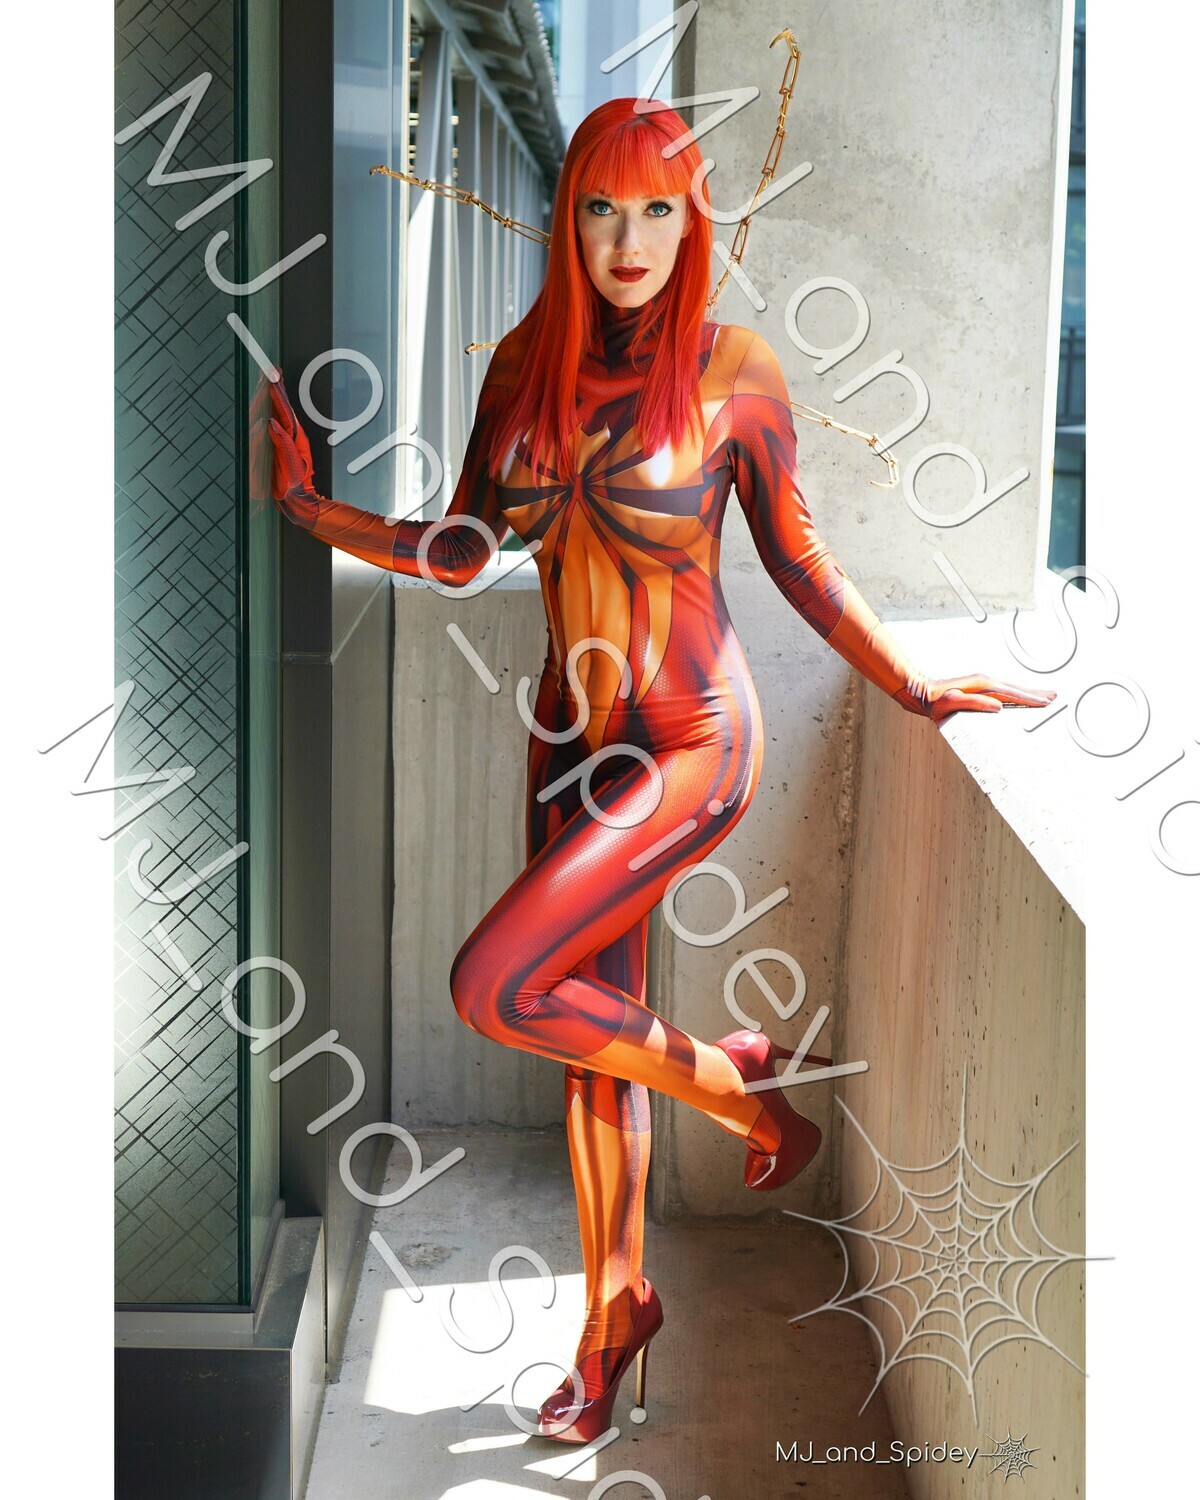 Marvel - Spider-Man - Mary Jane Watson - Iron Spider 1 - Digital Cosplay Image (@MJ_and_Spidey, MJ and Spidey, Comics)